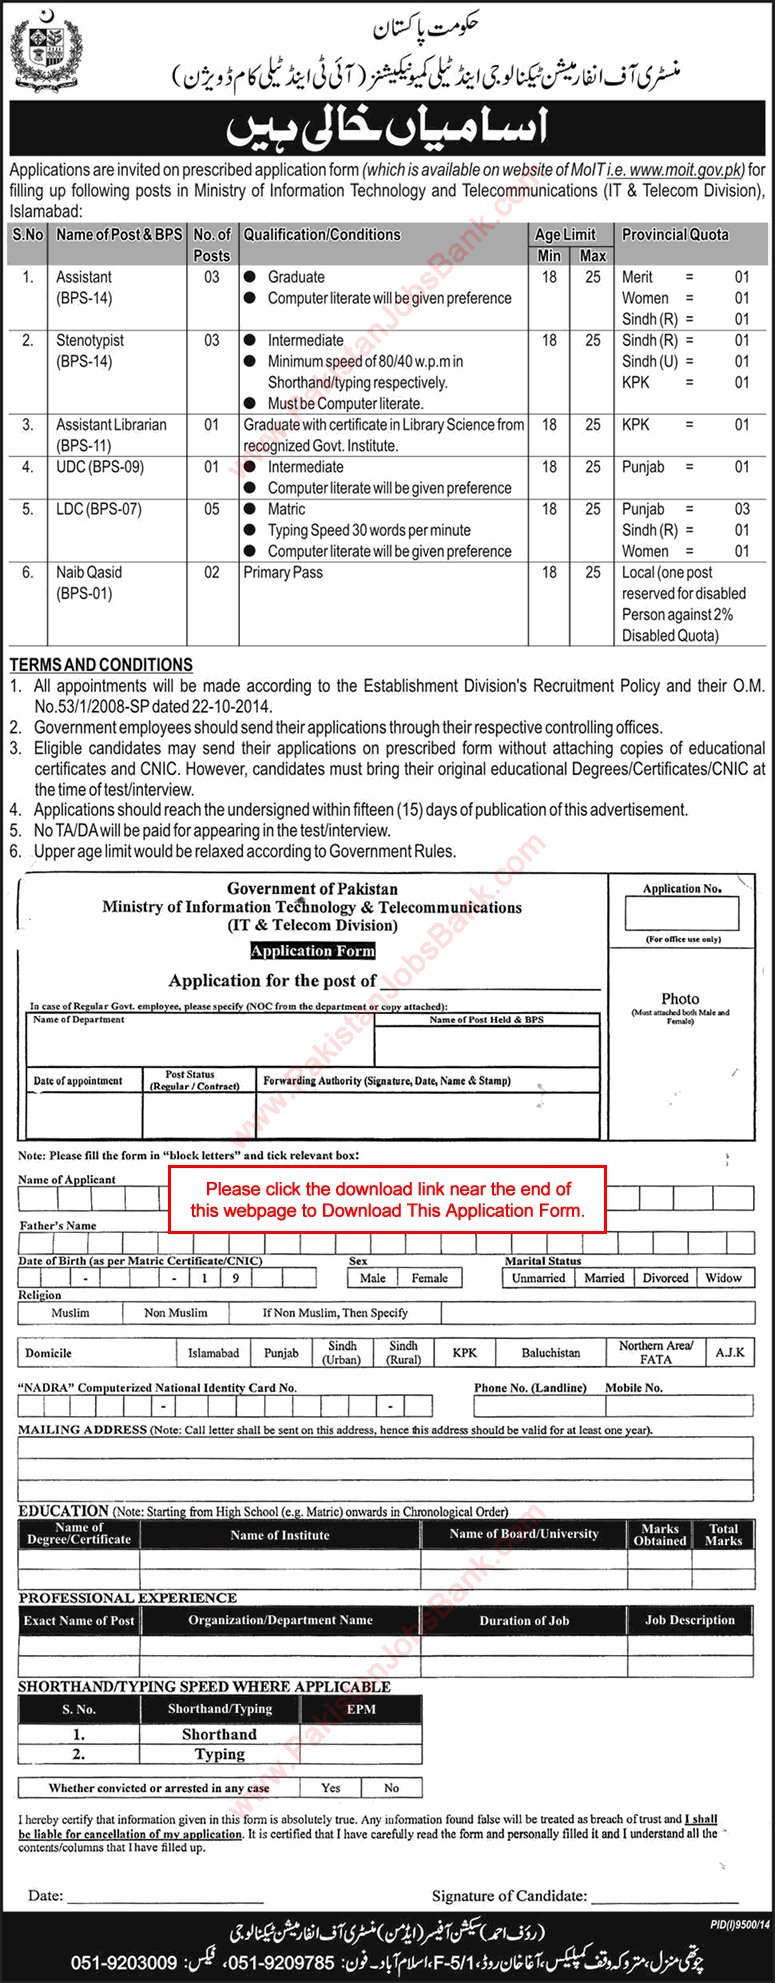 Ministry of Information Technology Jobs 2015 May Application Form Download IT & Telecom Division